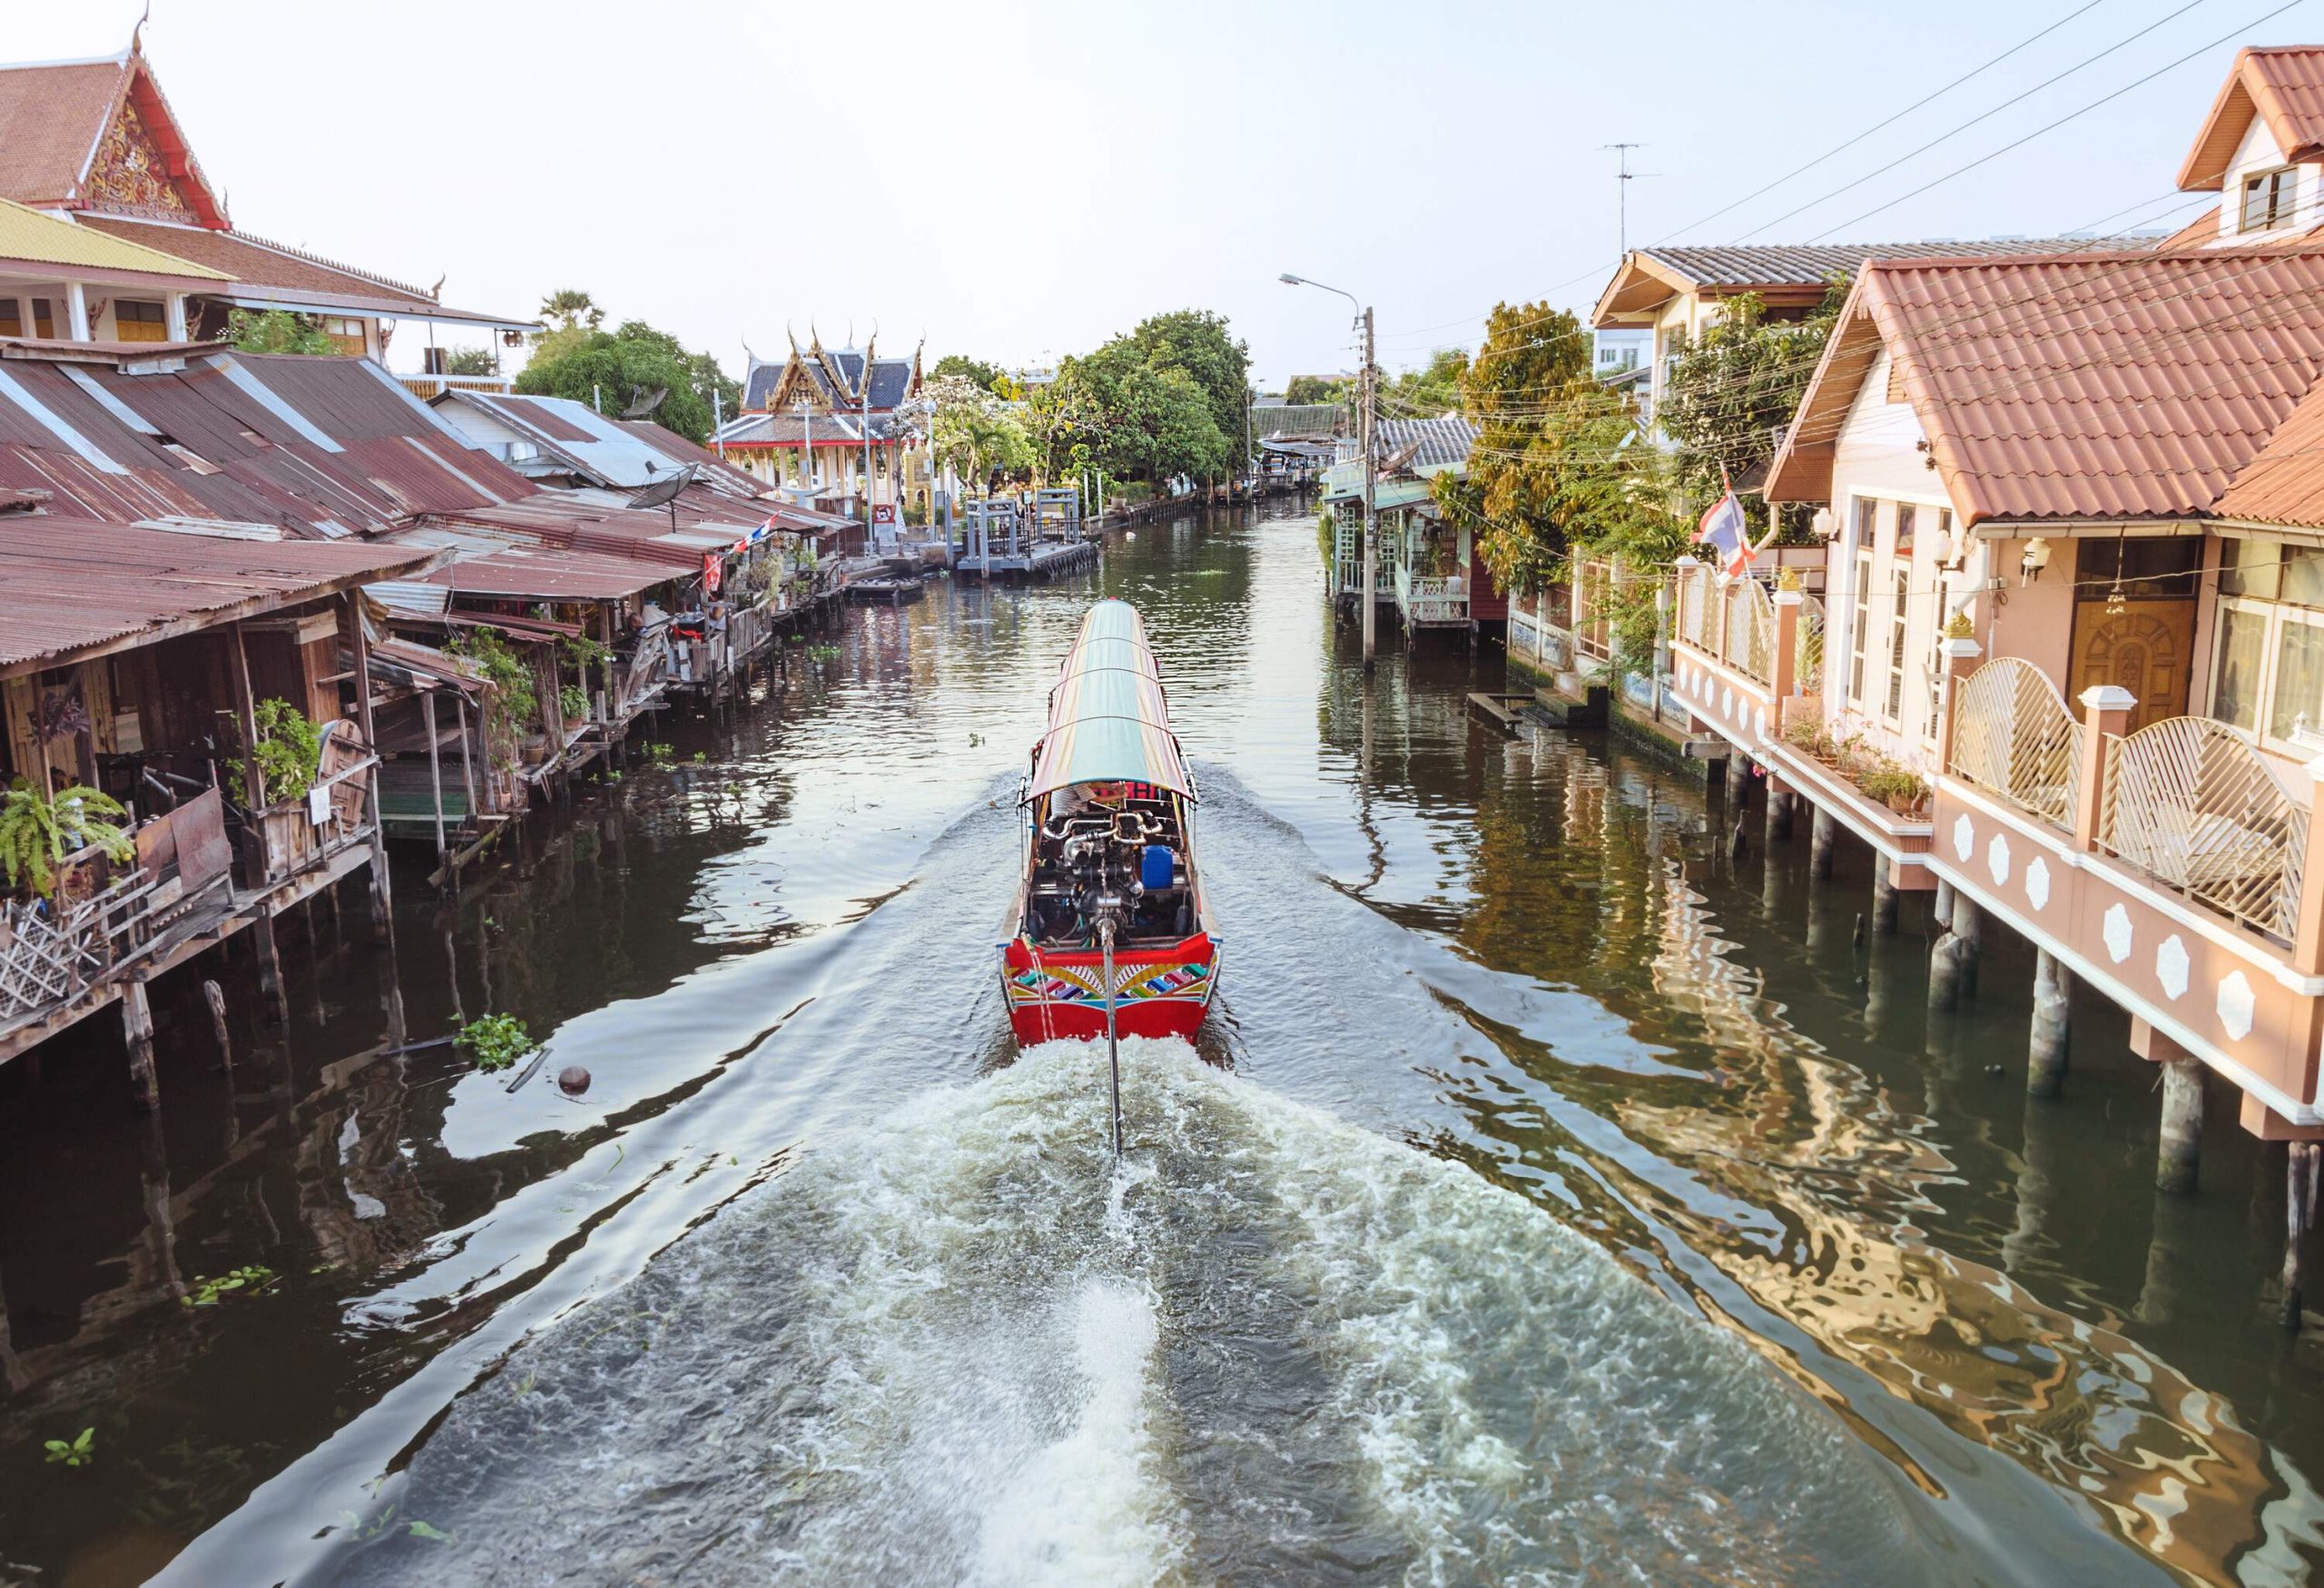 A red passenger boat cruises across a canal amid houses perched overwater.